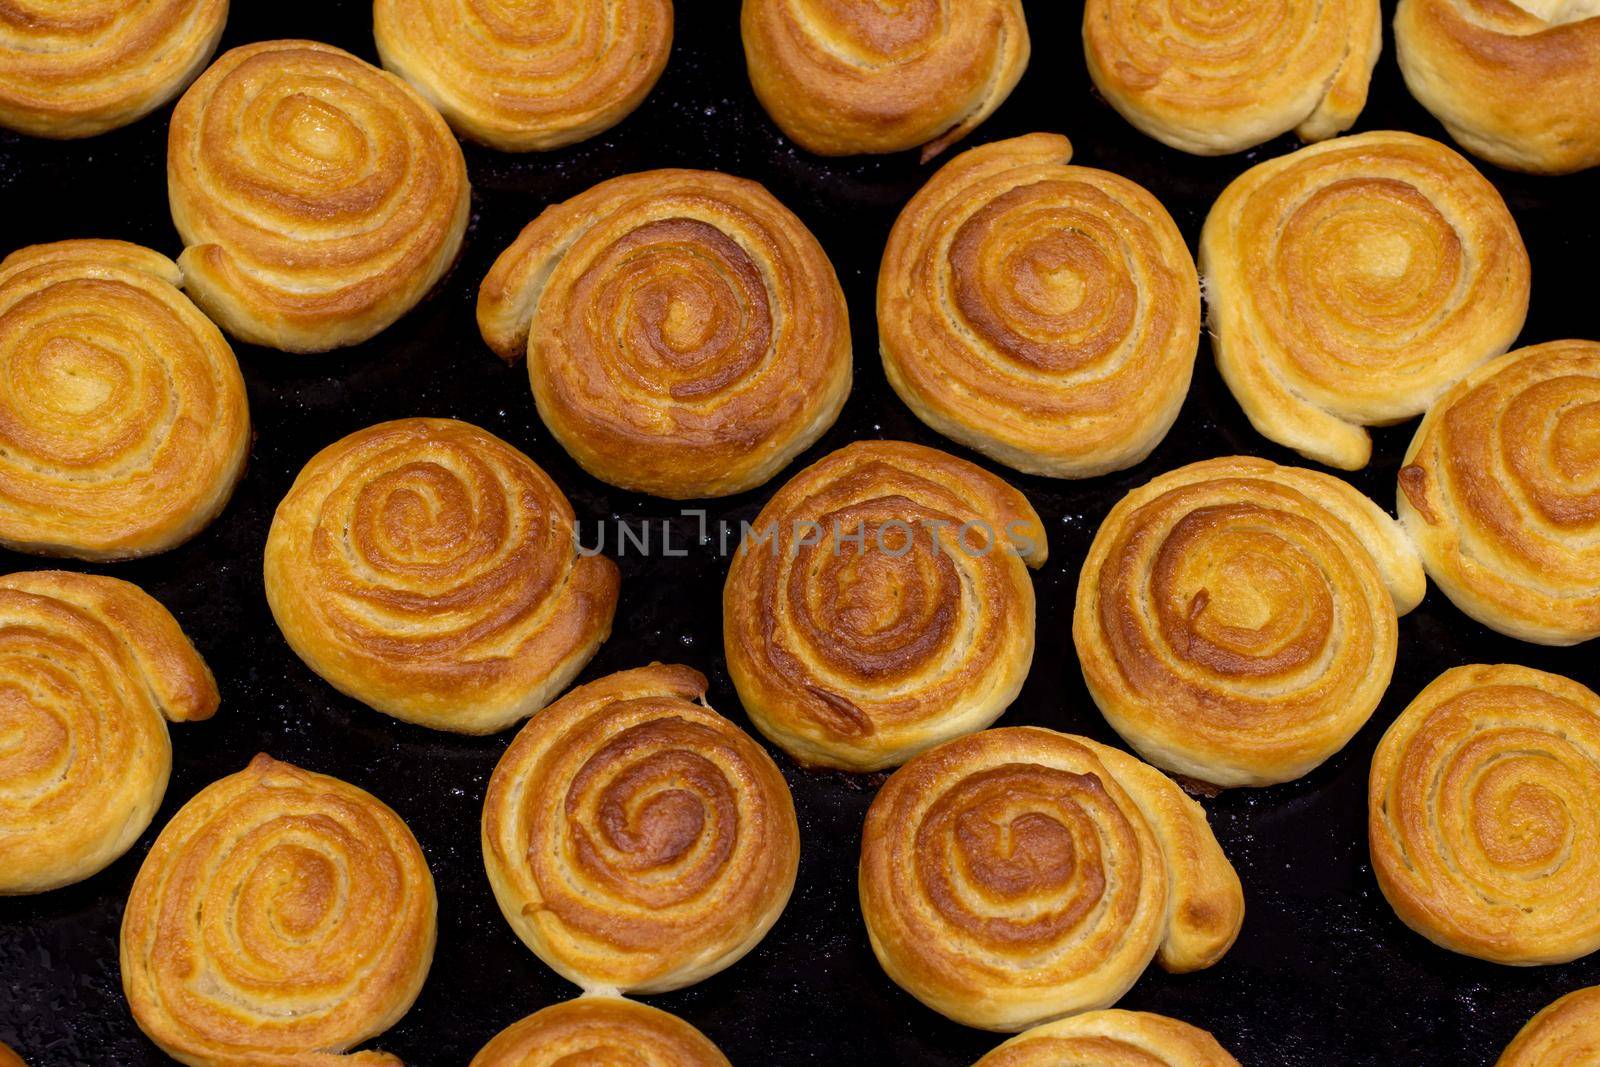 baking sweet buns in the oven close-up. the top view by bySergPo